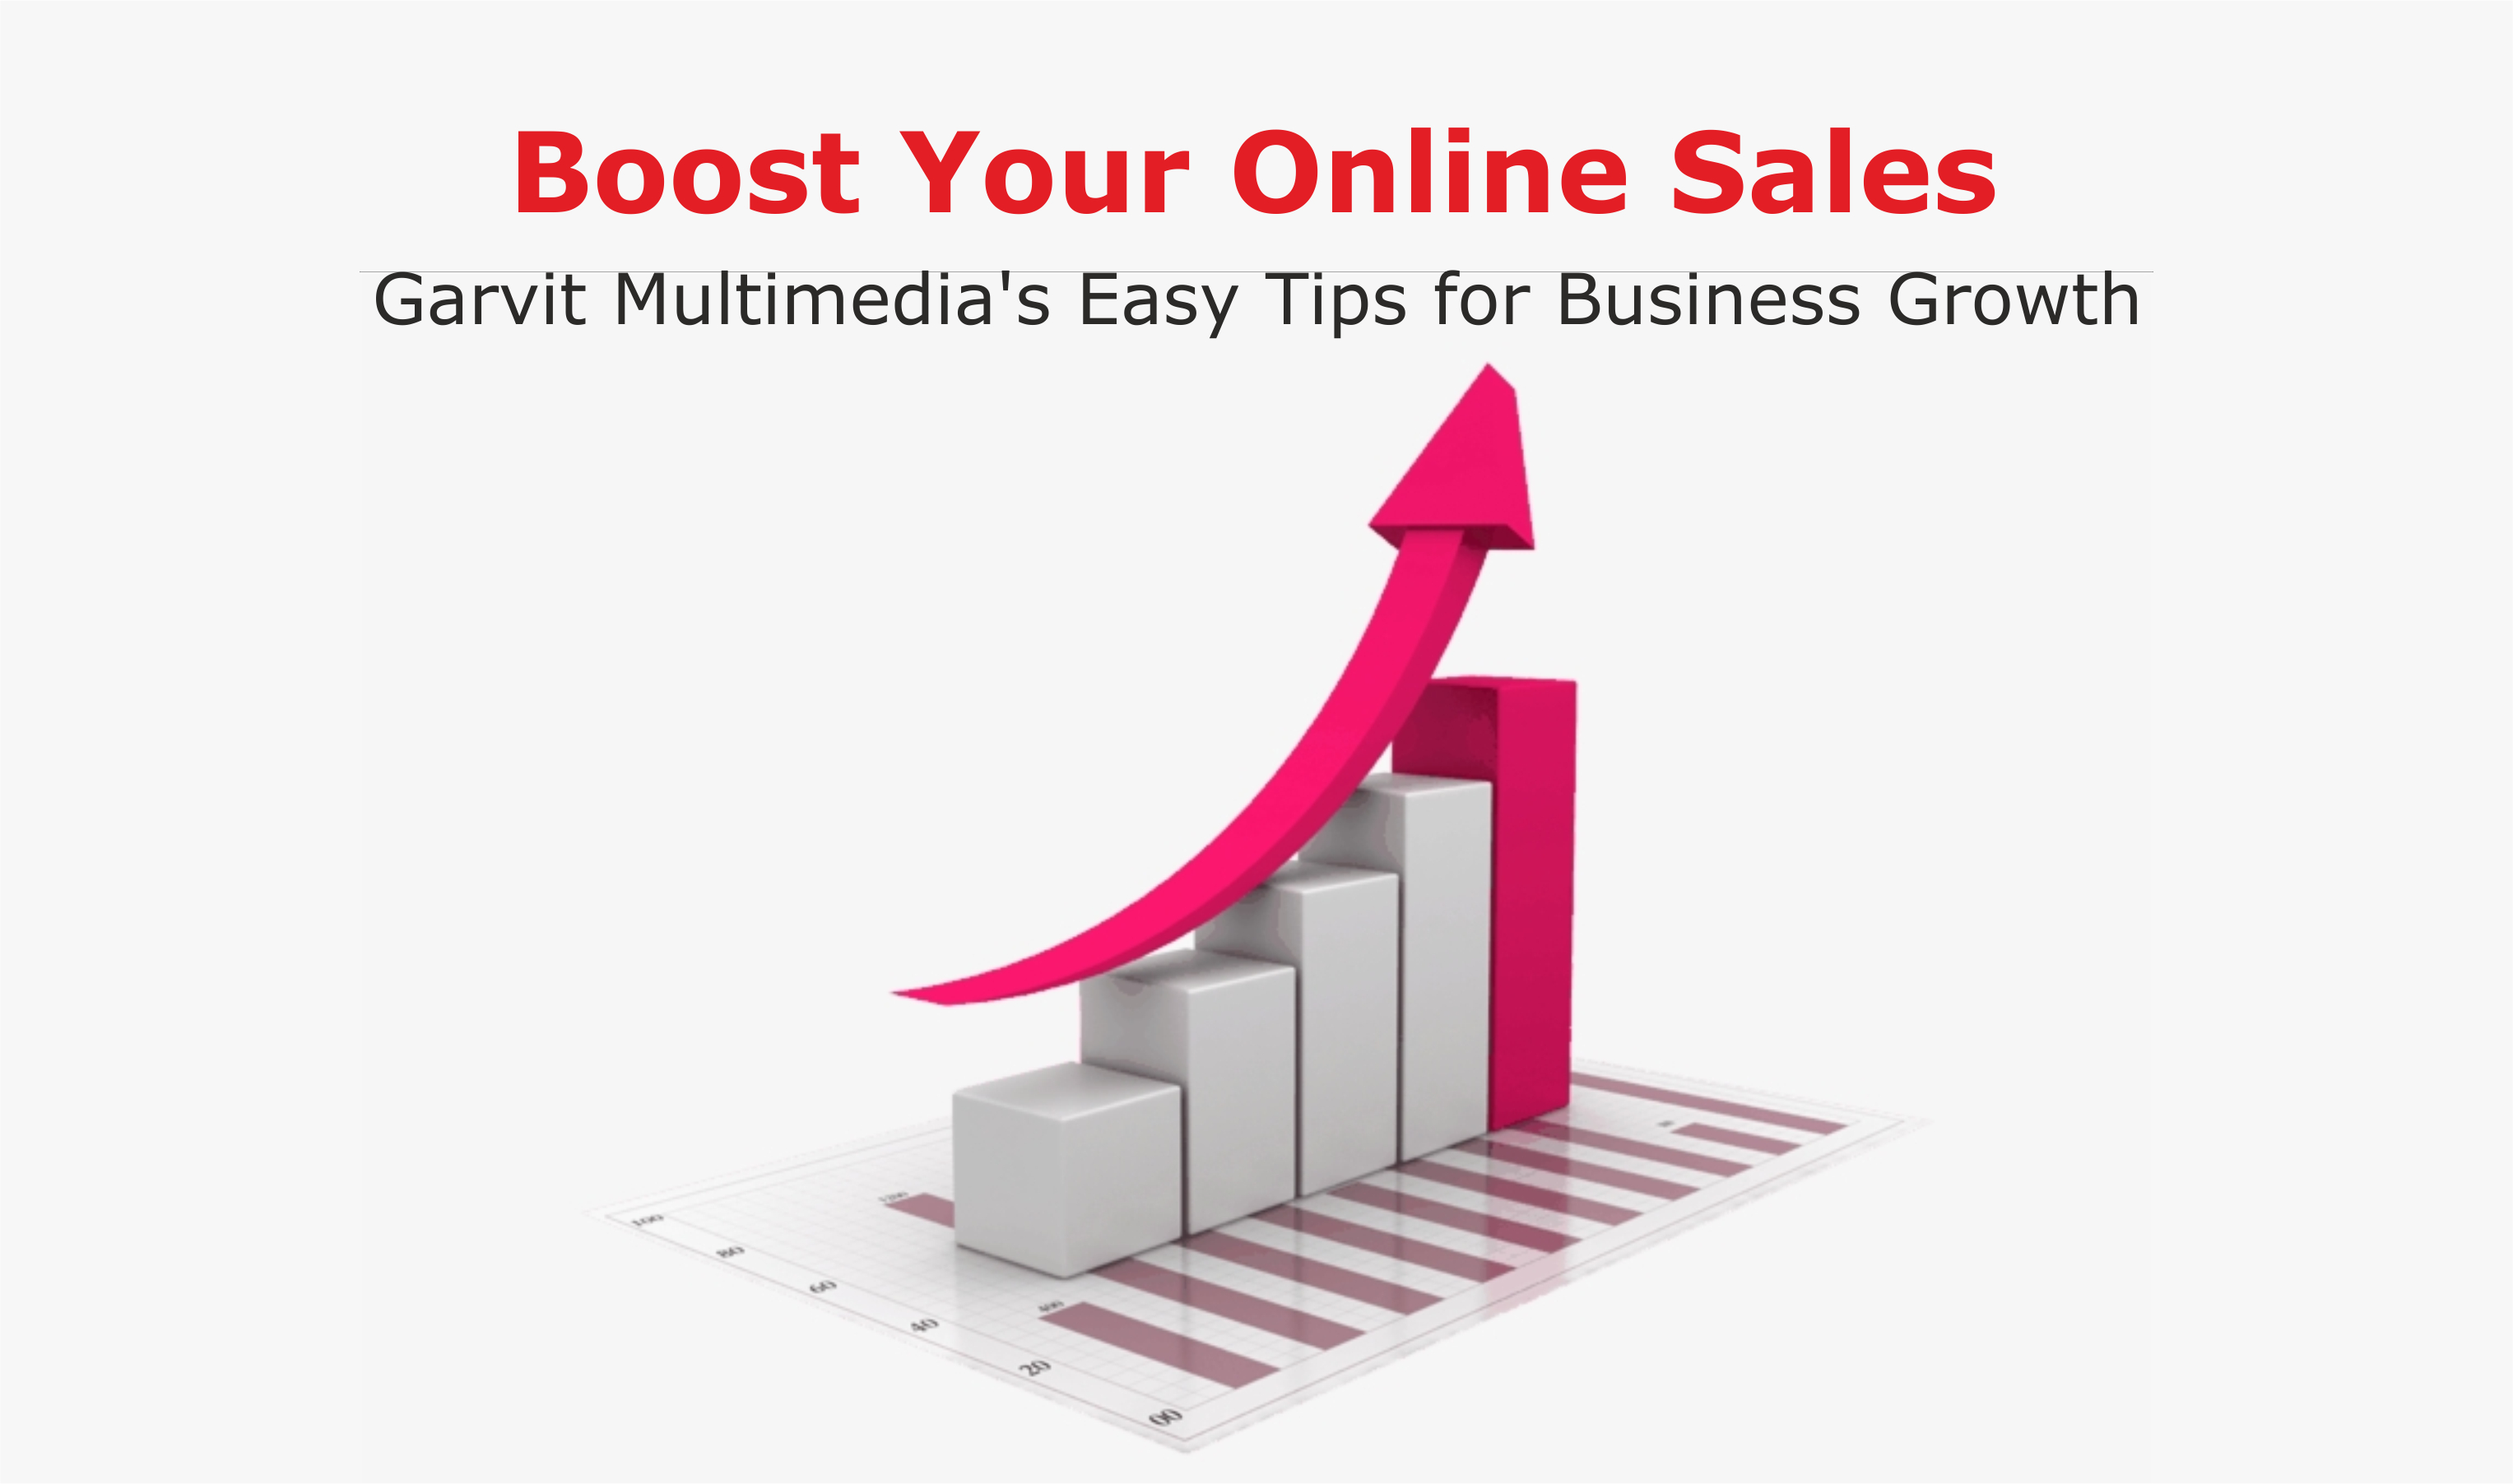 Boost Your Online Sales: Garvit Multimedia's Easy Tips for Business Growth